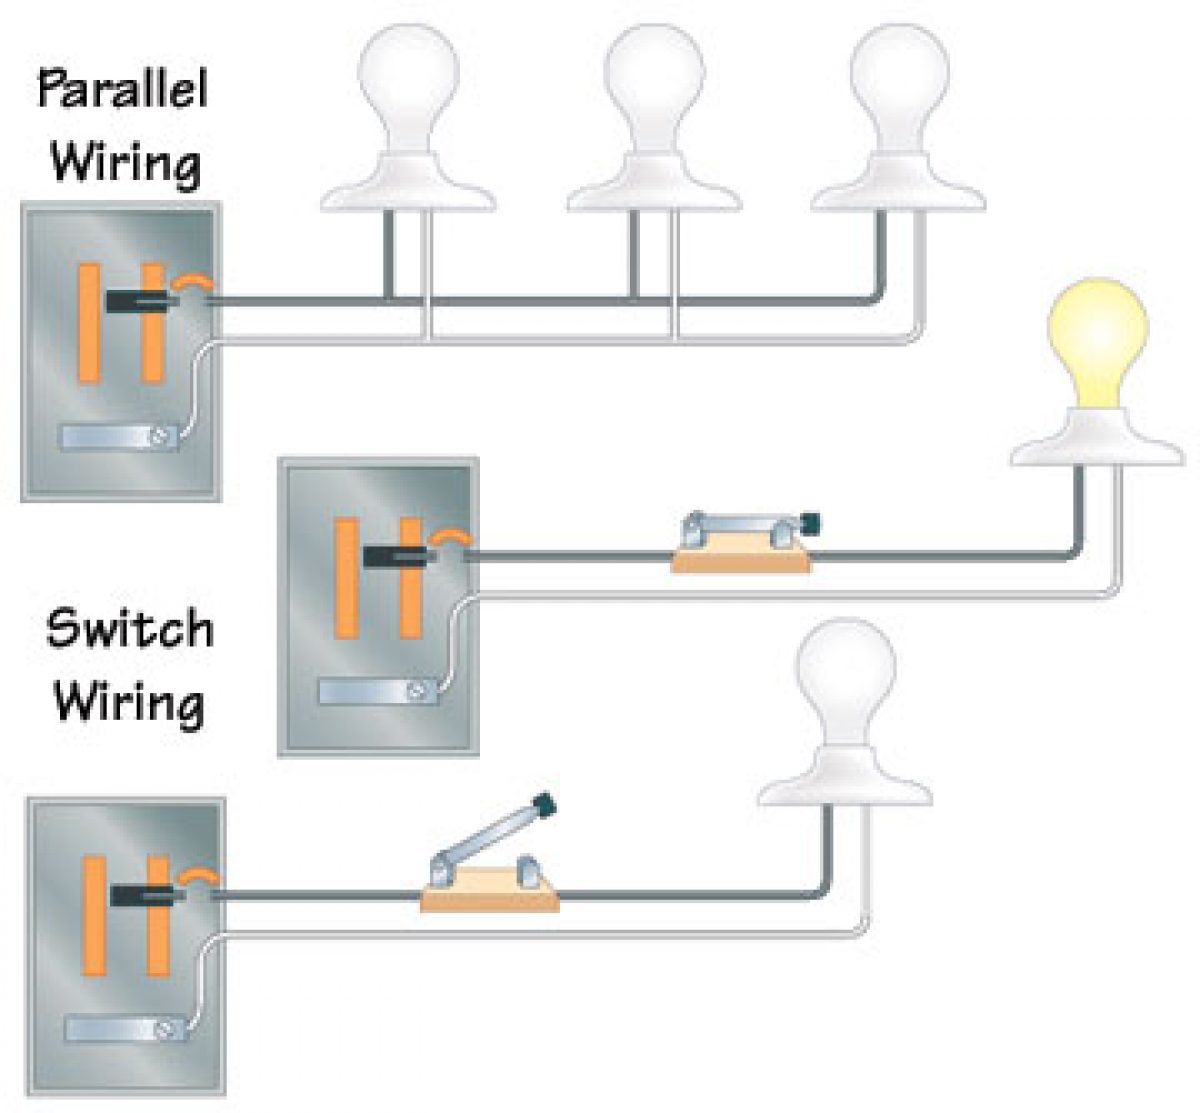 Types Of Electrical Wiring, How Many Types Of Wiring System Are There